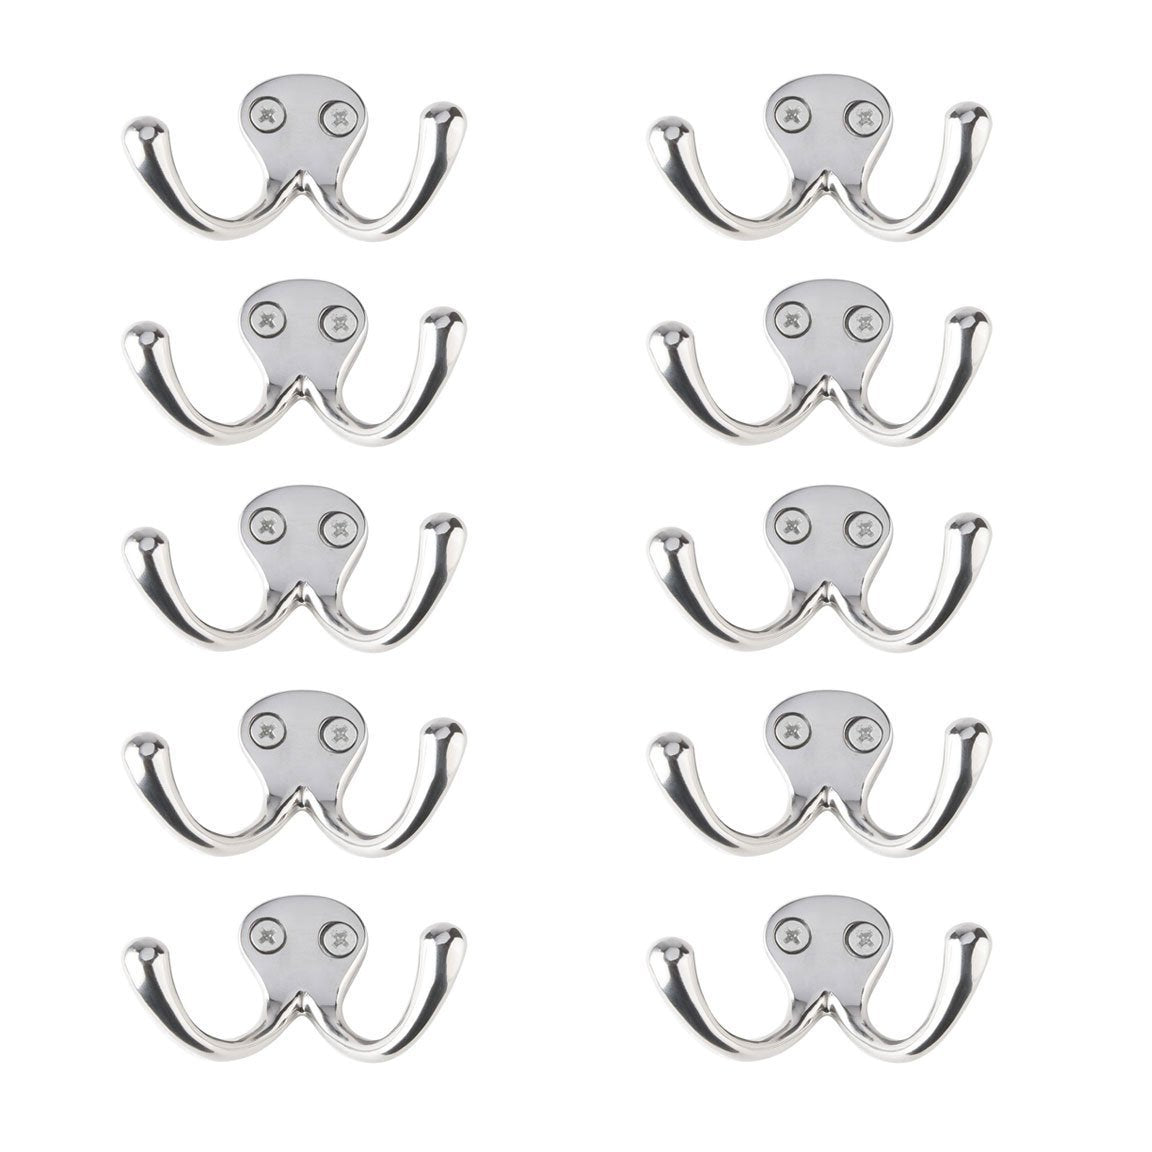 Best seller  bar face wall mount purse coat key hook double arm polished stainless steel set of 10